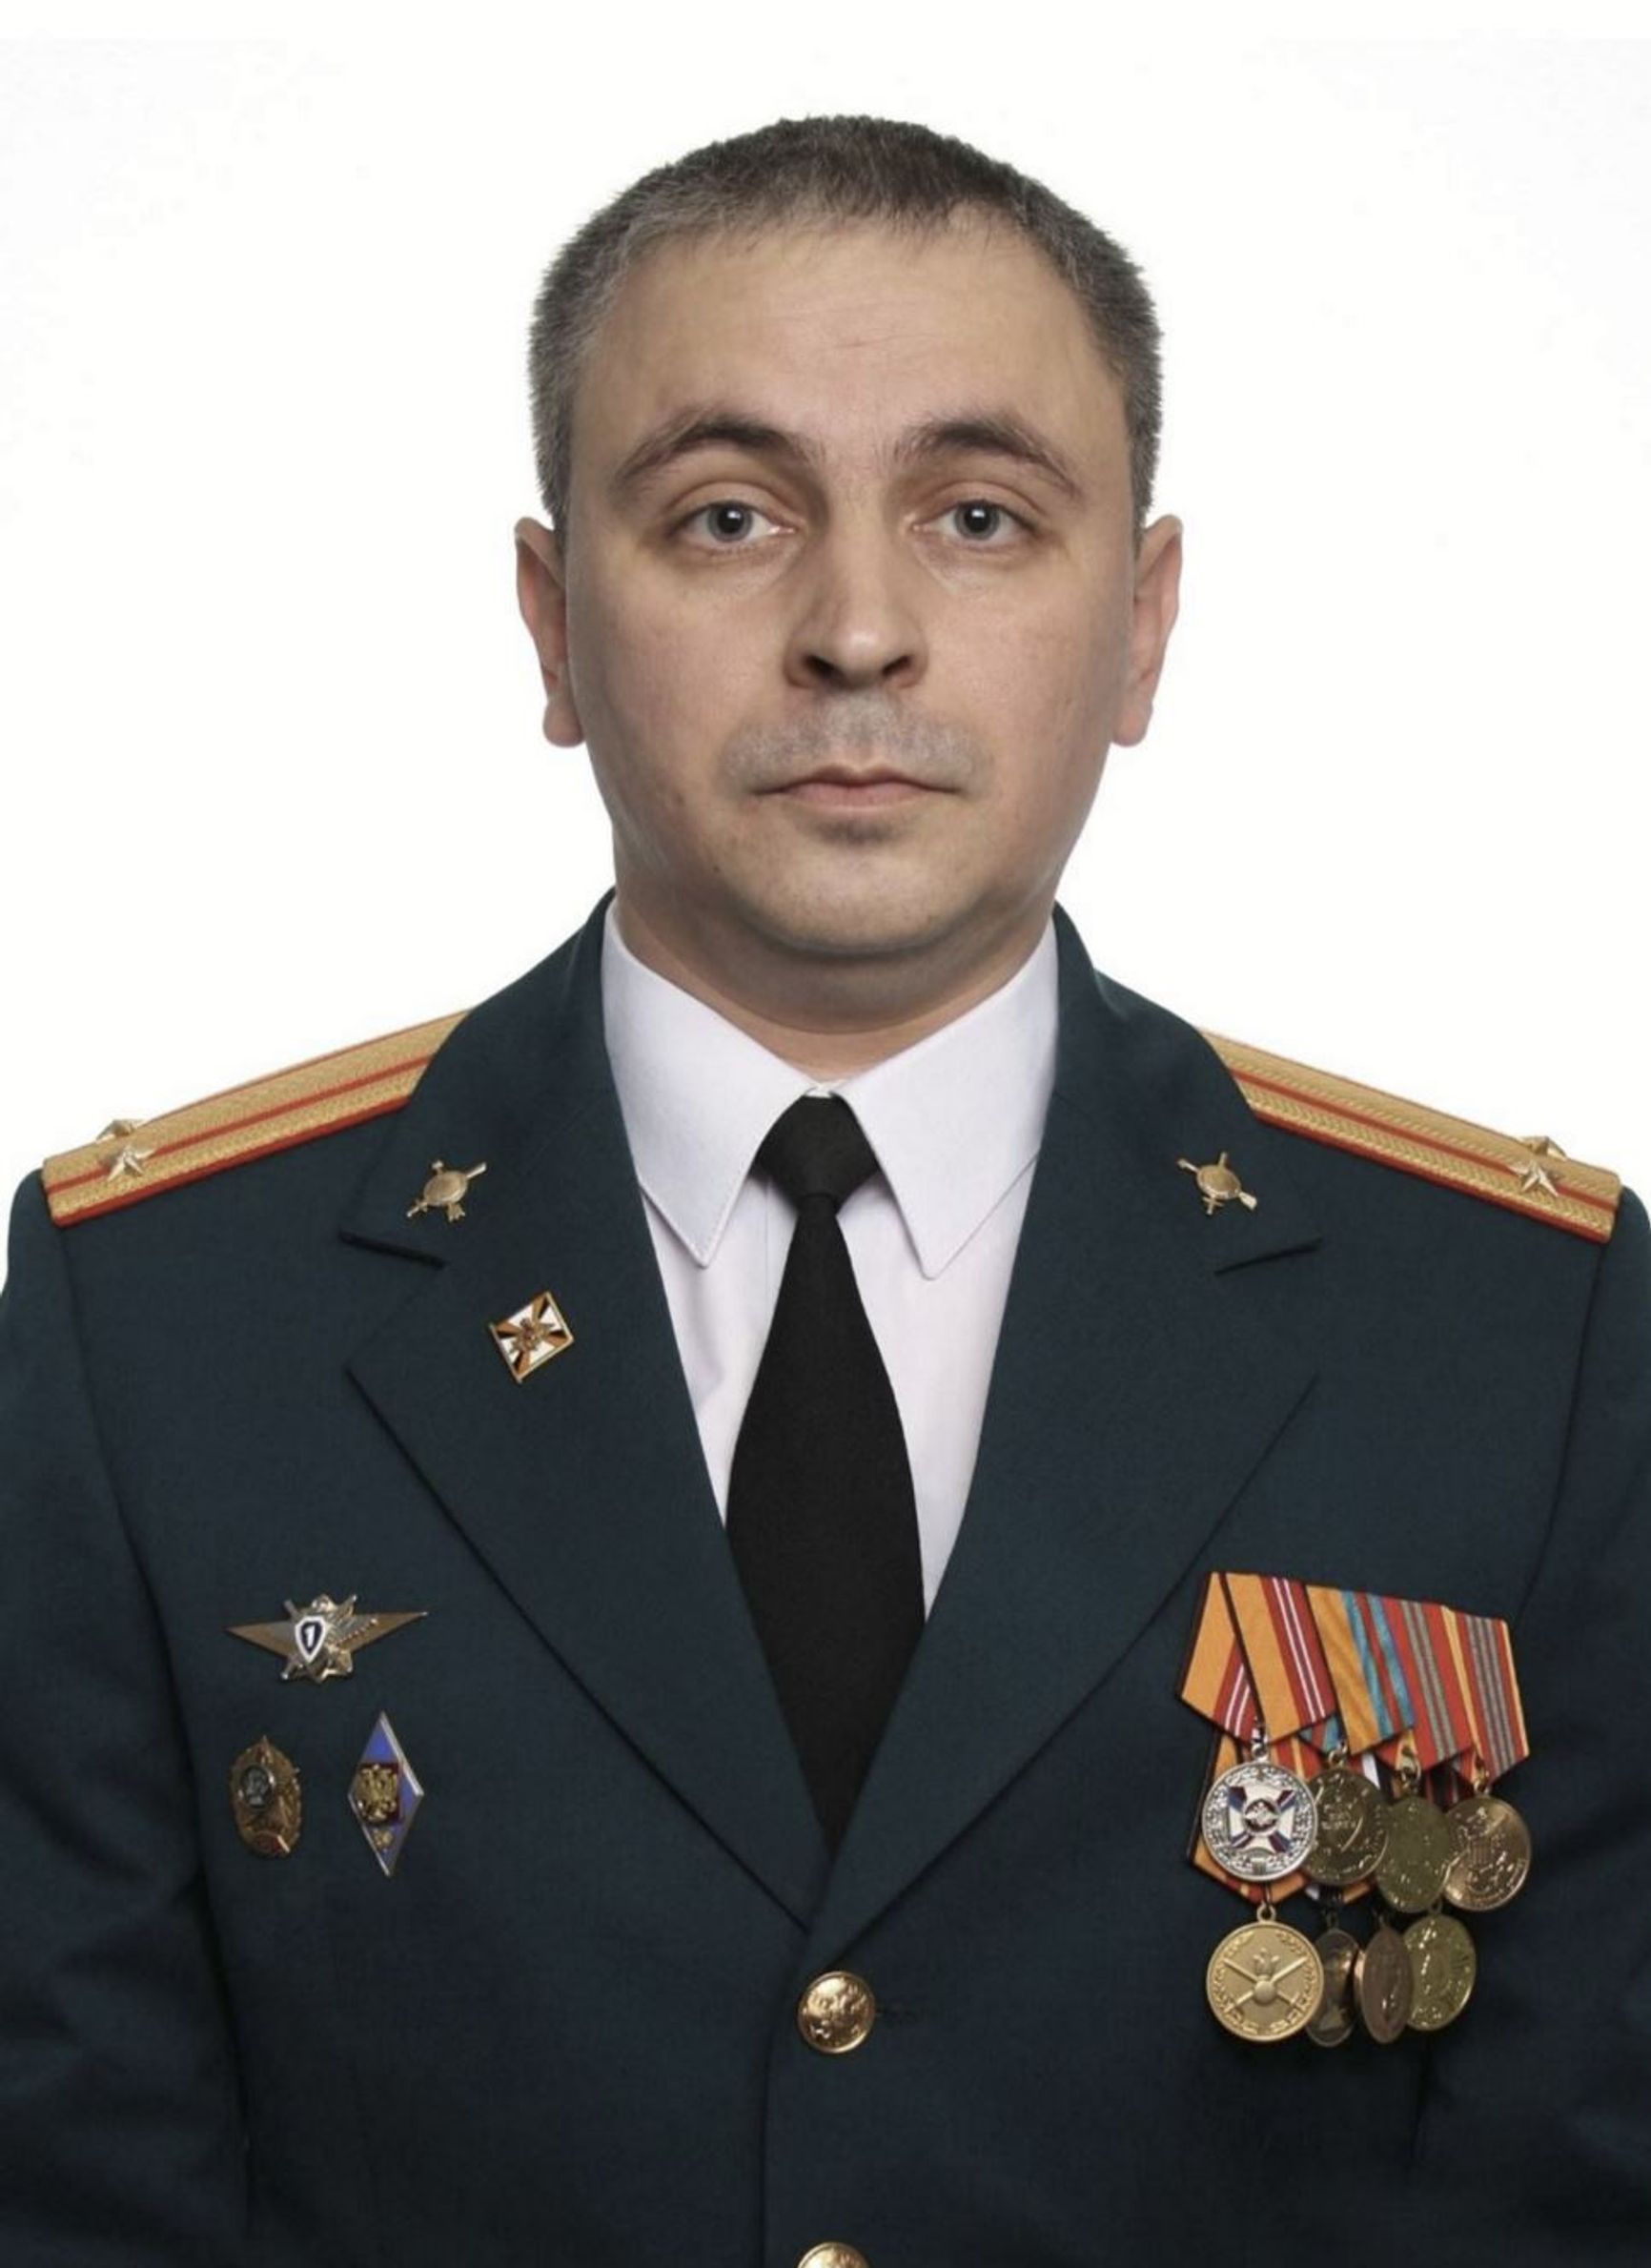 Igor Bagnyuk, photo provided by a colleague. Decorated, among other awards, with the Medal for Military Valor, 1st Degree, and for his participation in the military operation in Syria